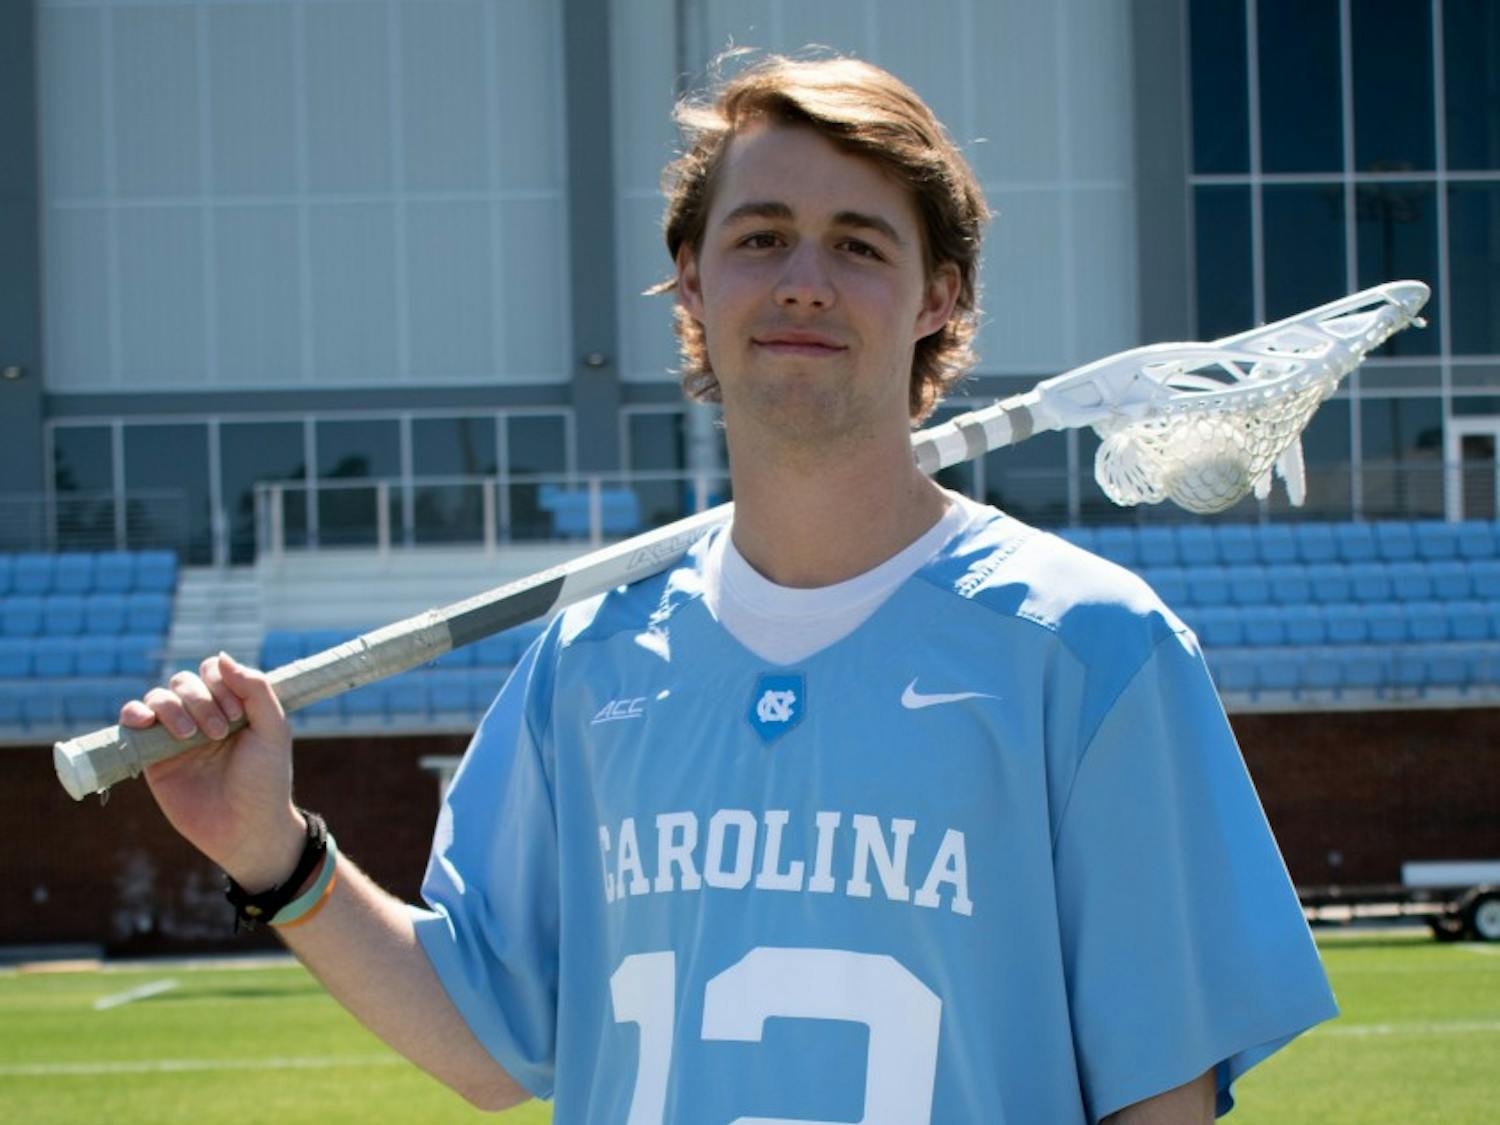 Senior UNC lacrosse player Andy Matthews ranks second on the team for goals with 34 this season, and has lead the team in assists the past 2 years with 27 in 2017 and 26 in 2018. Matthews started in all of the games in both the 2017 and 2018 seasons, with 2017 being a ACC championship win for the Tar Heels. 